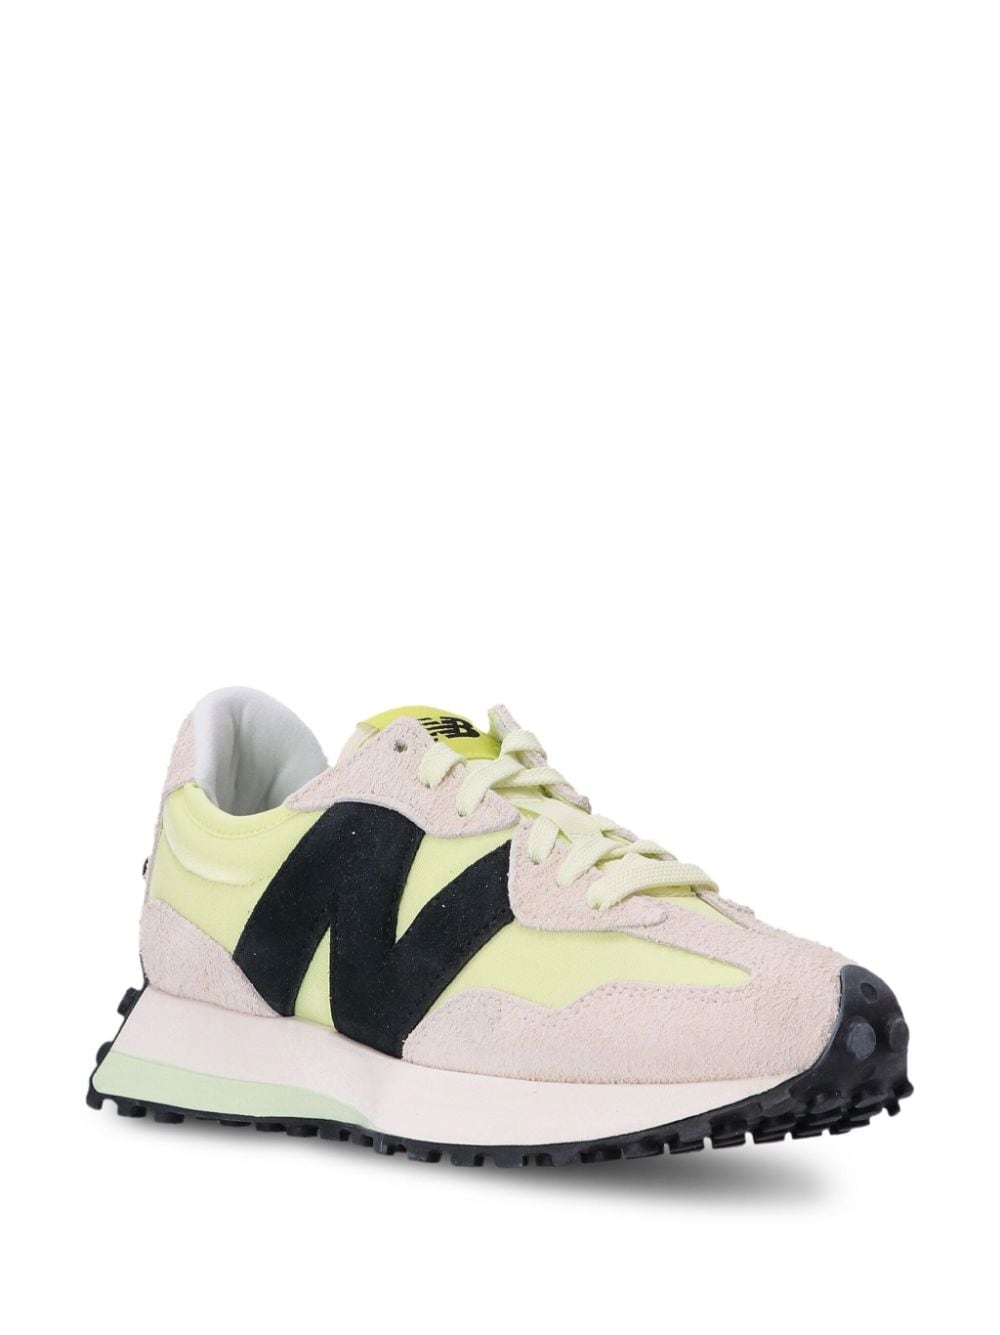 New Balance 327 low-top sneakers Green